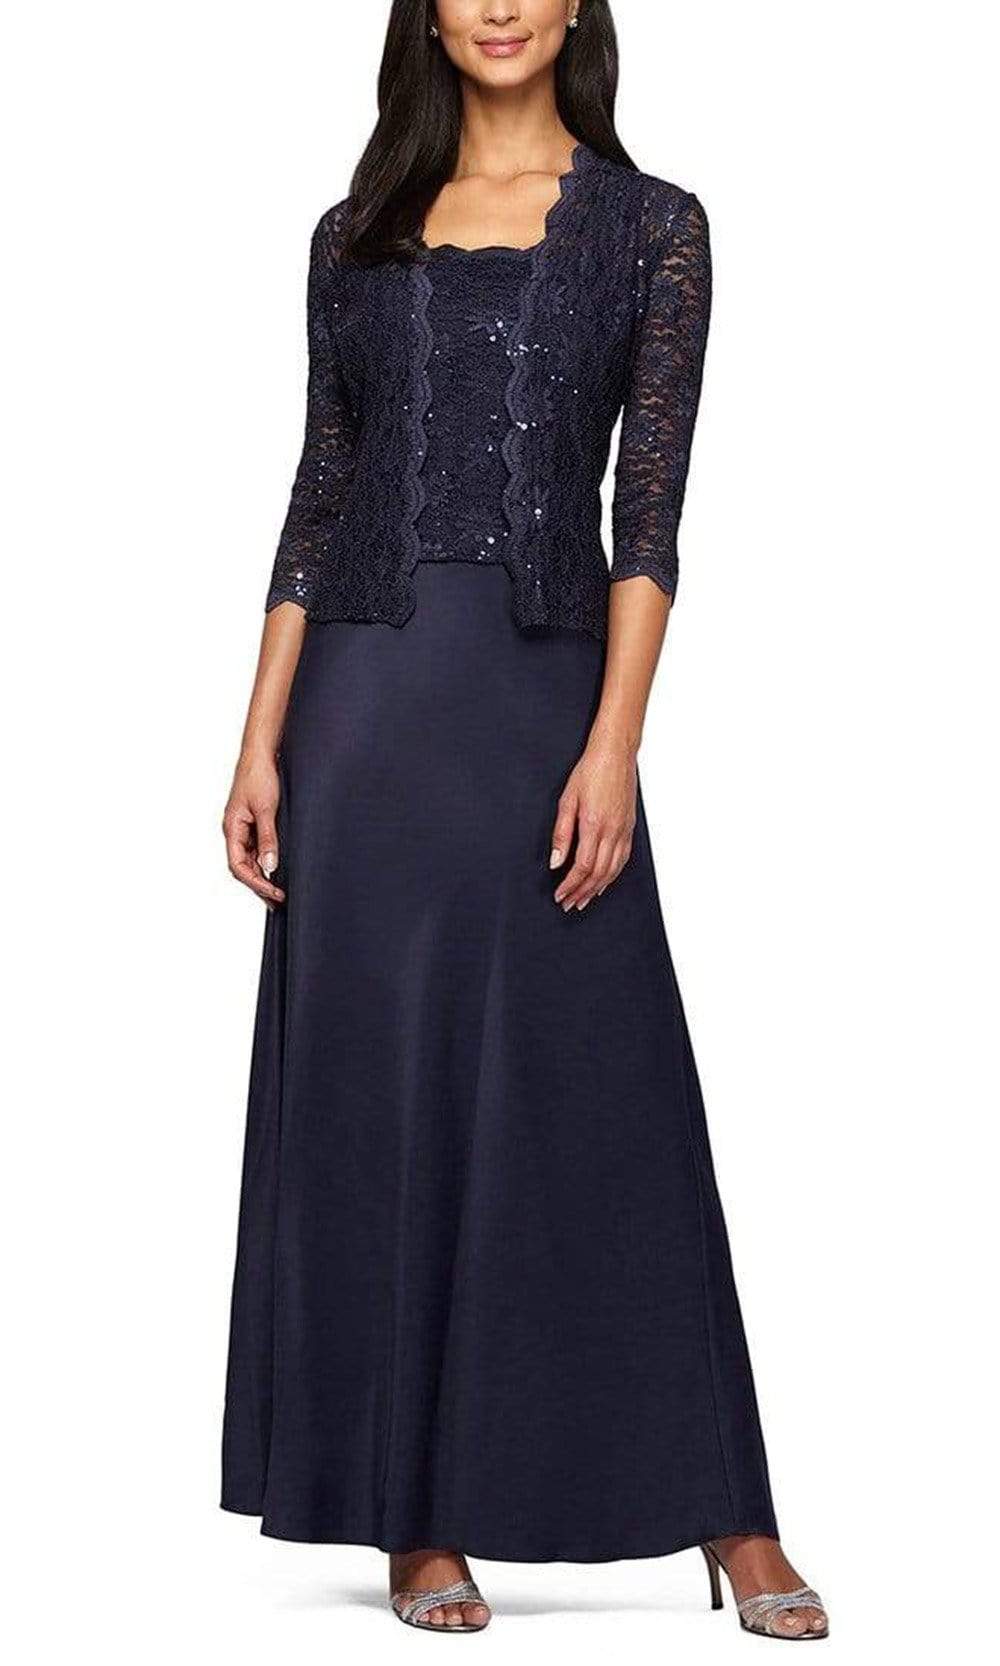 Ashly lace and chiffon coverup Mother of the Bride Dress